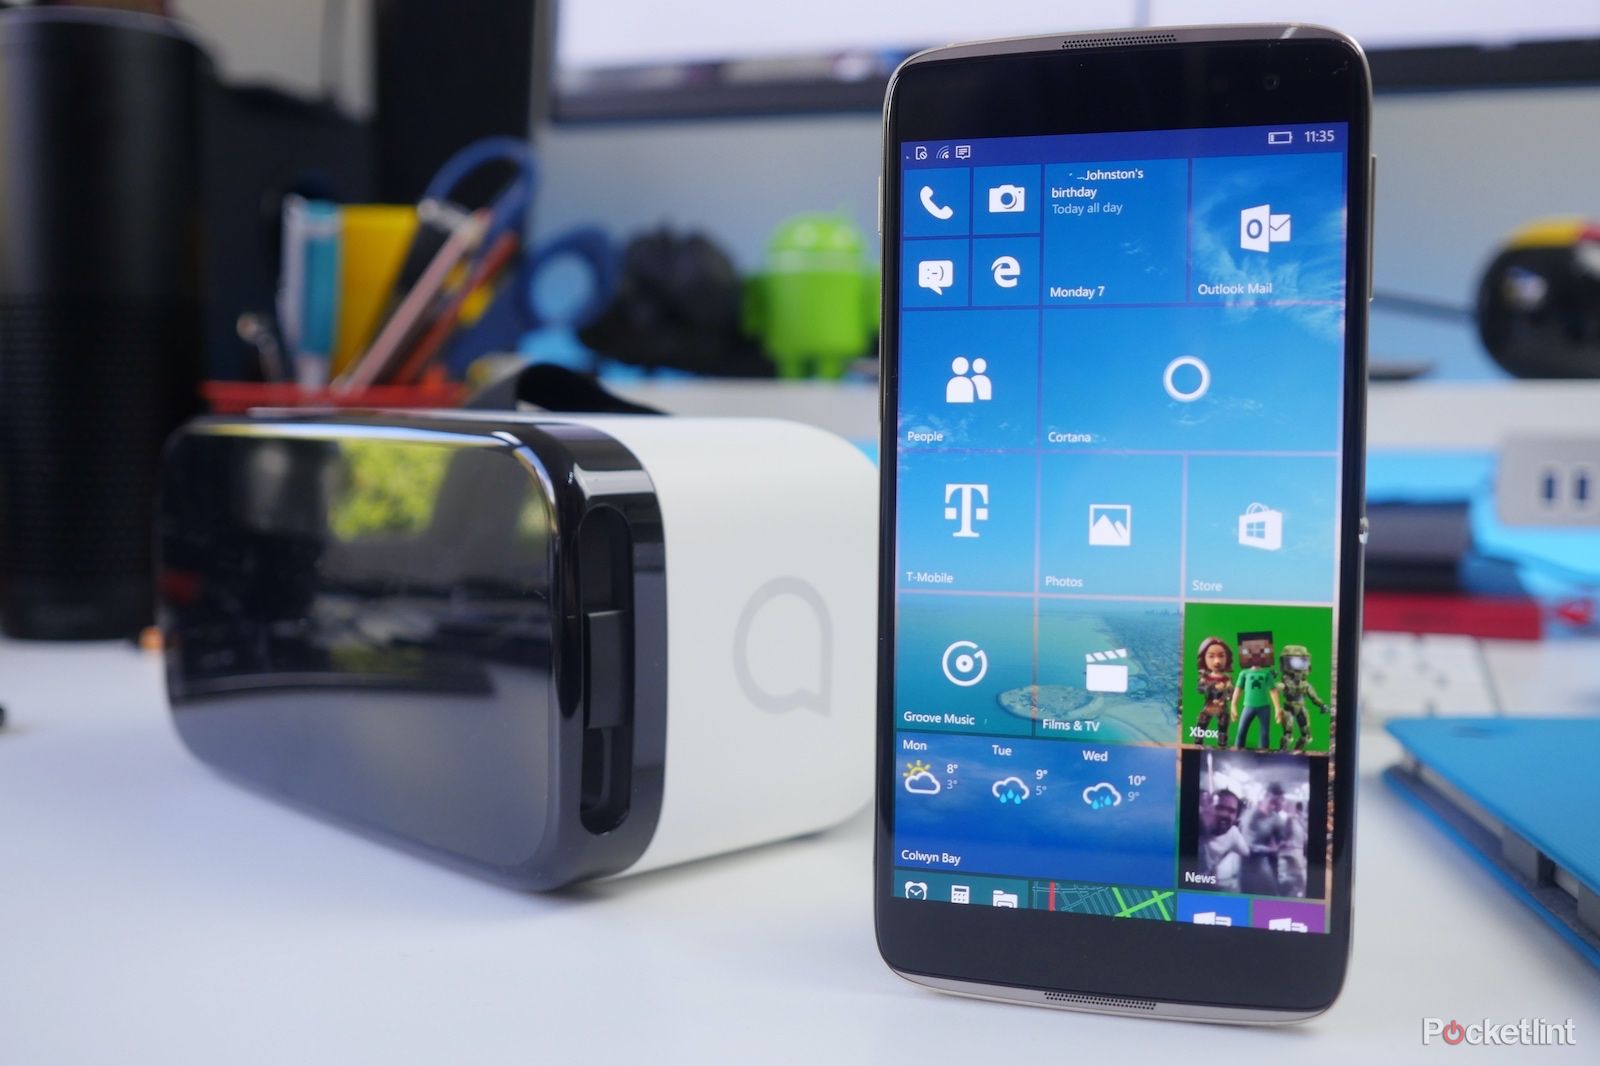 alcatel idol 4s with windows 10 review image 3